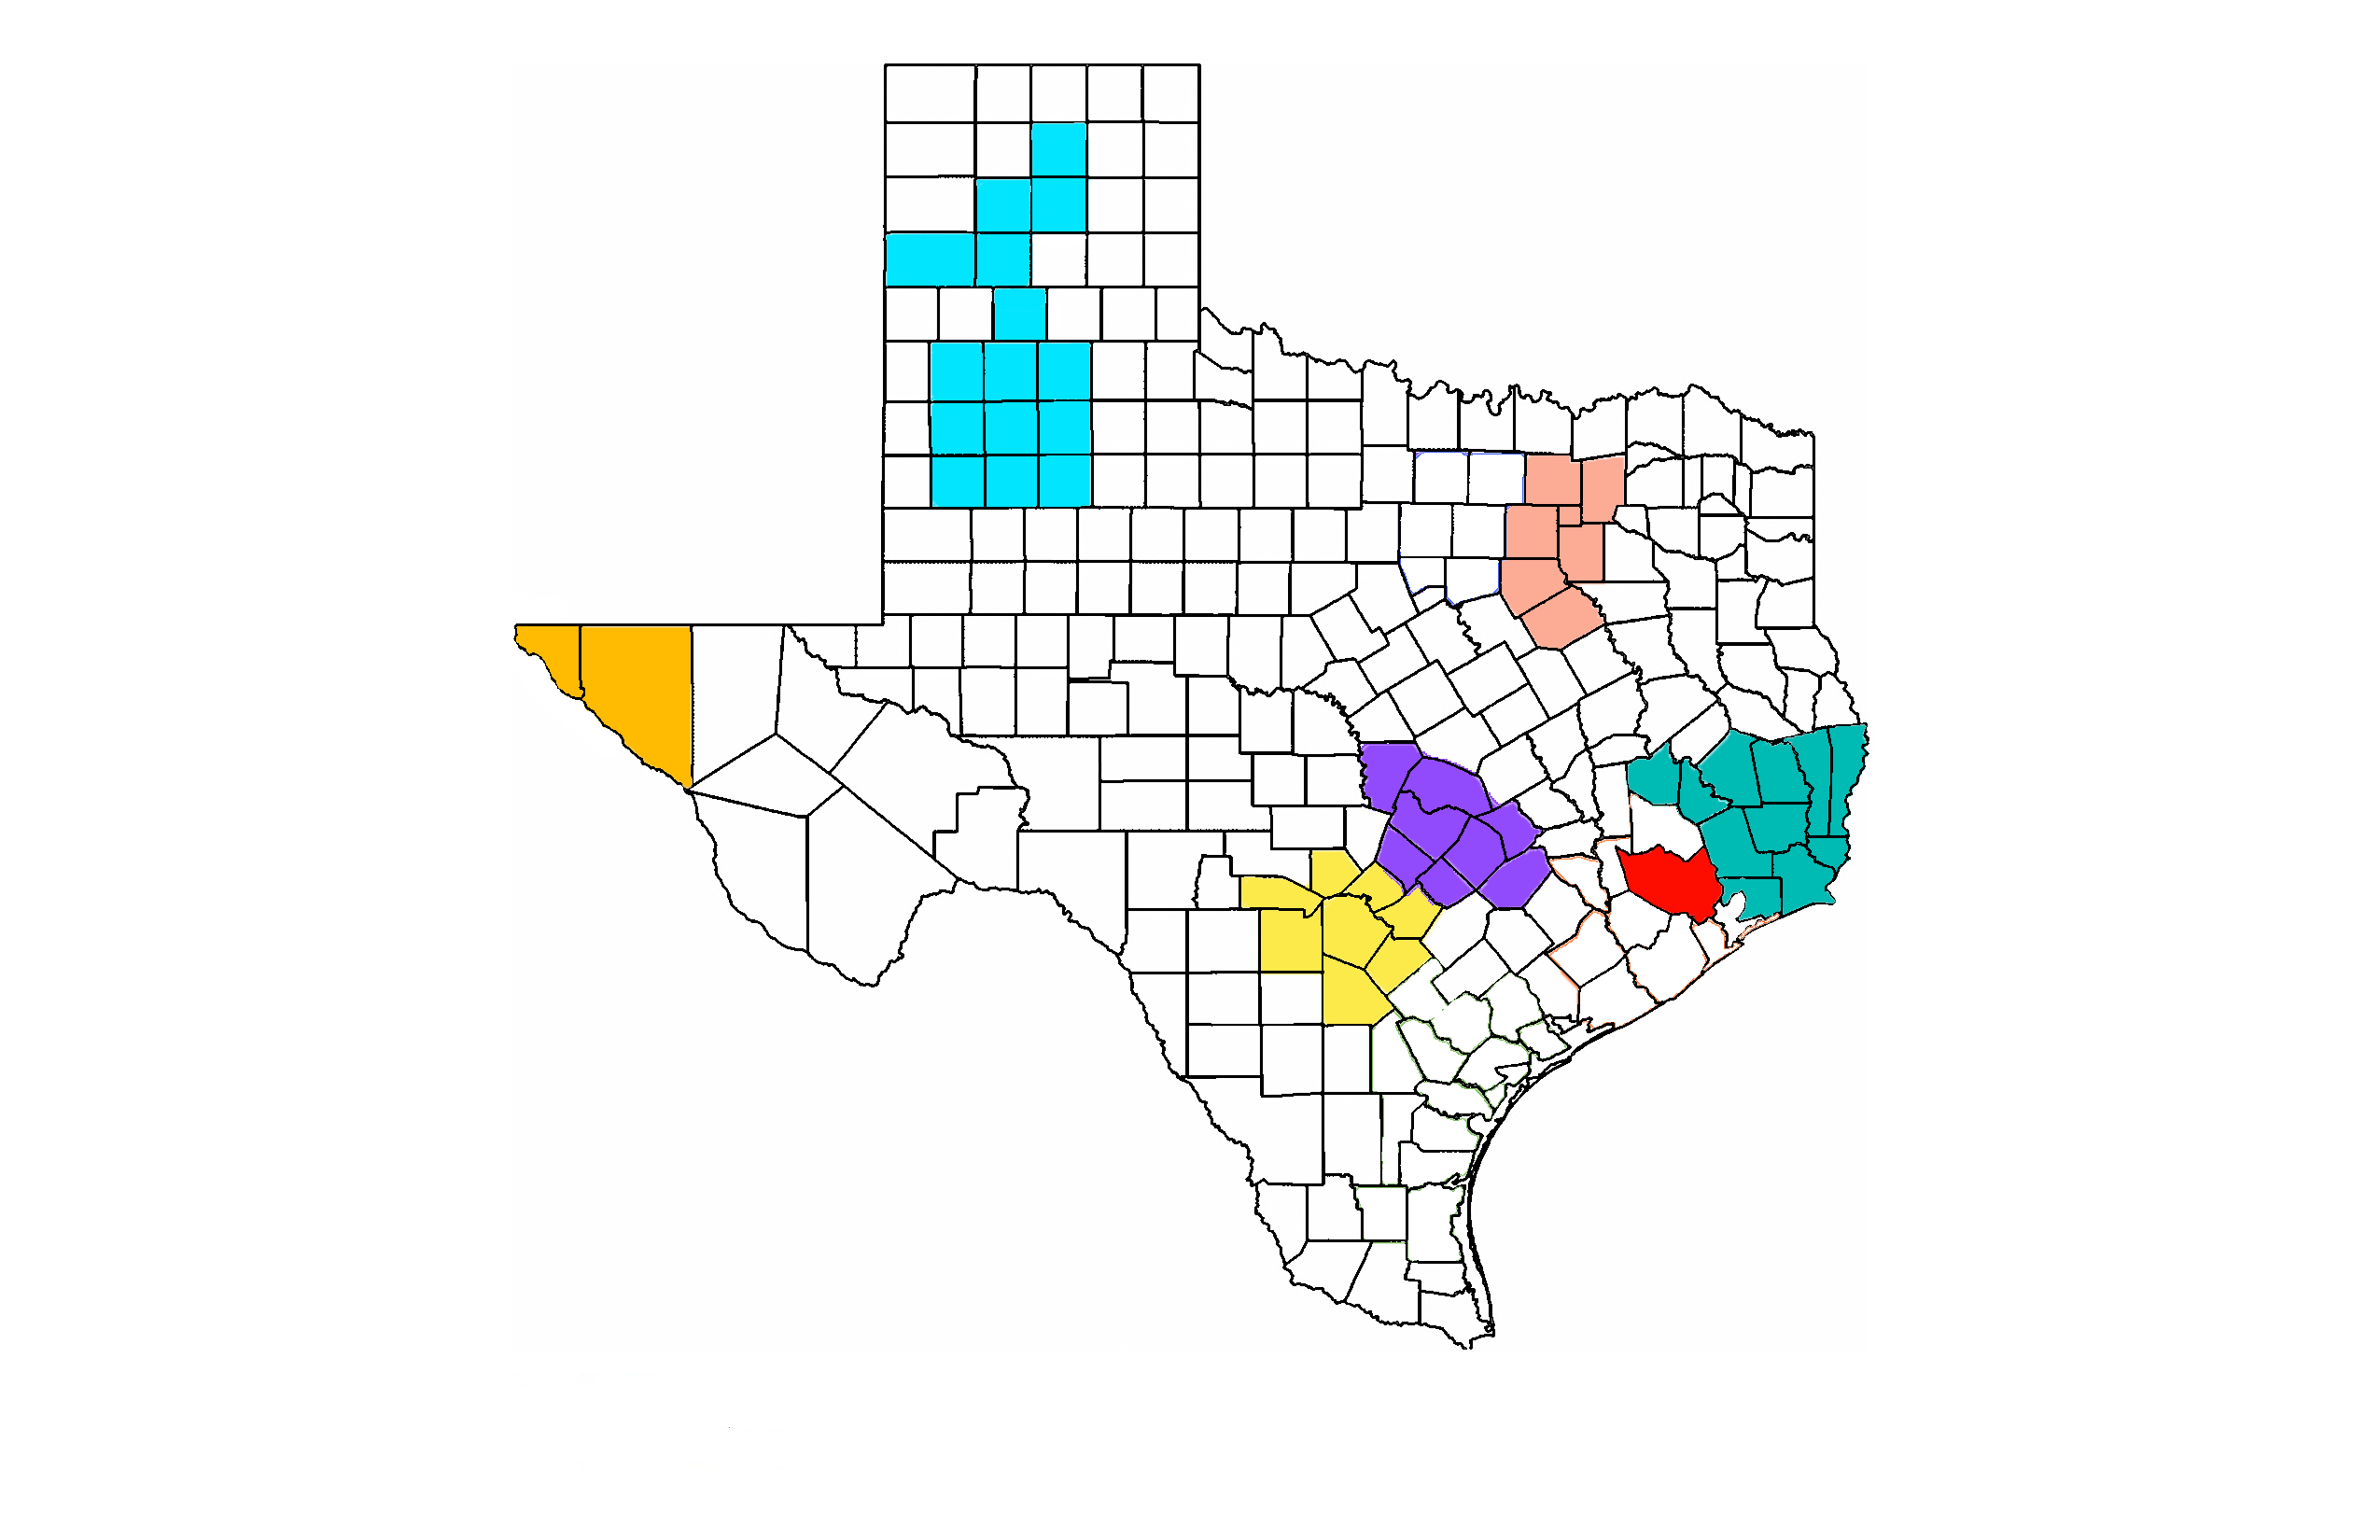 CDS service counties marked on map of Texas